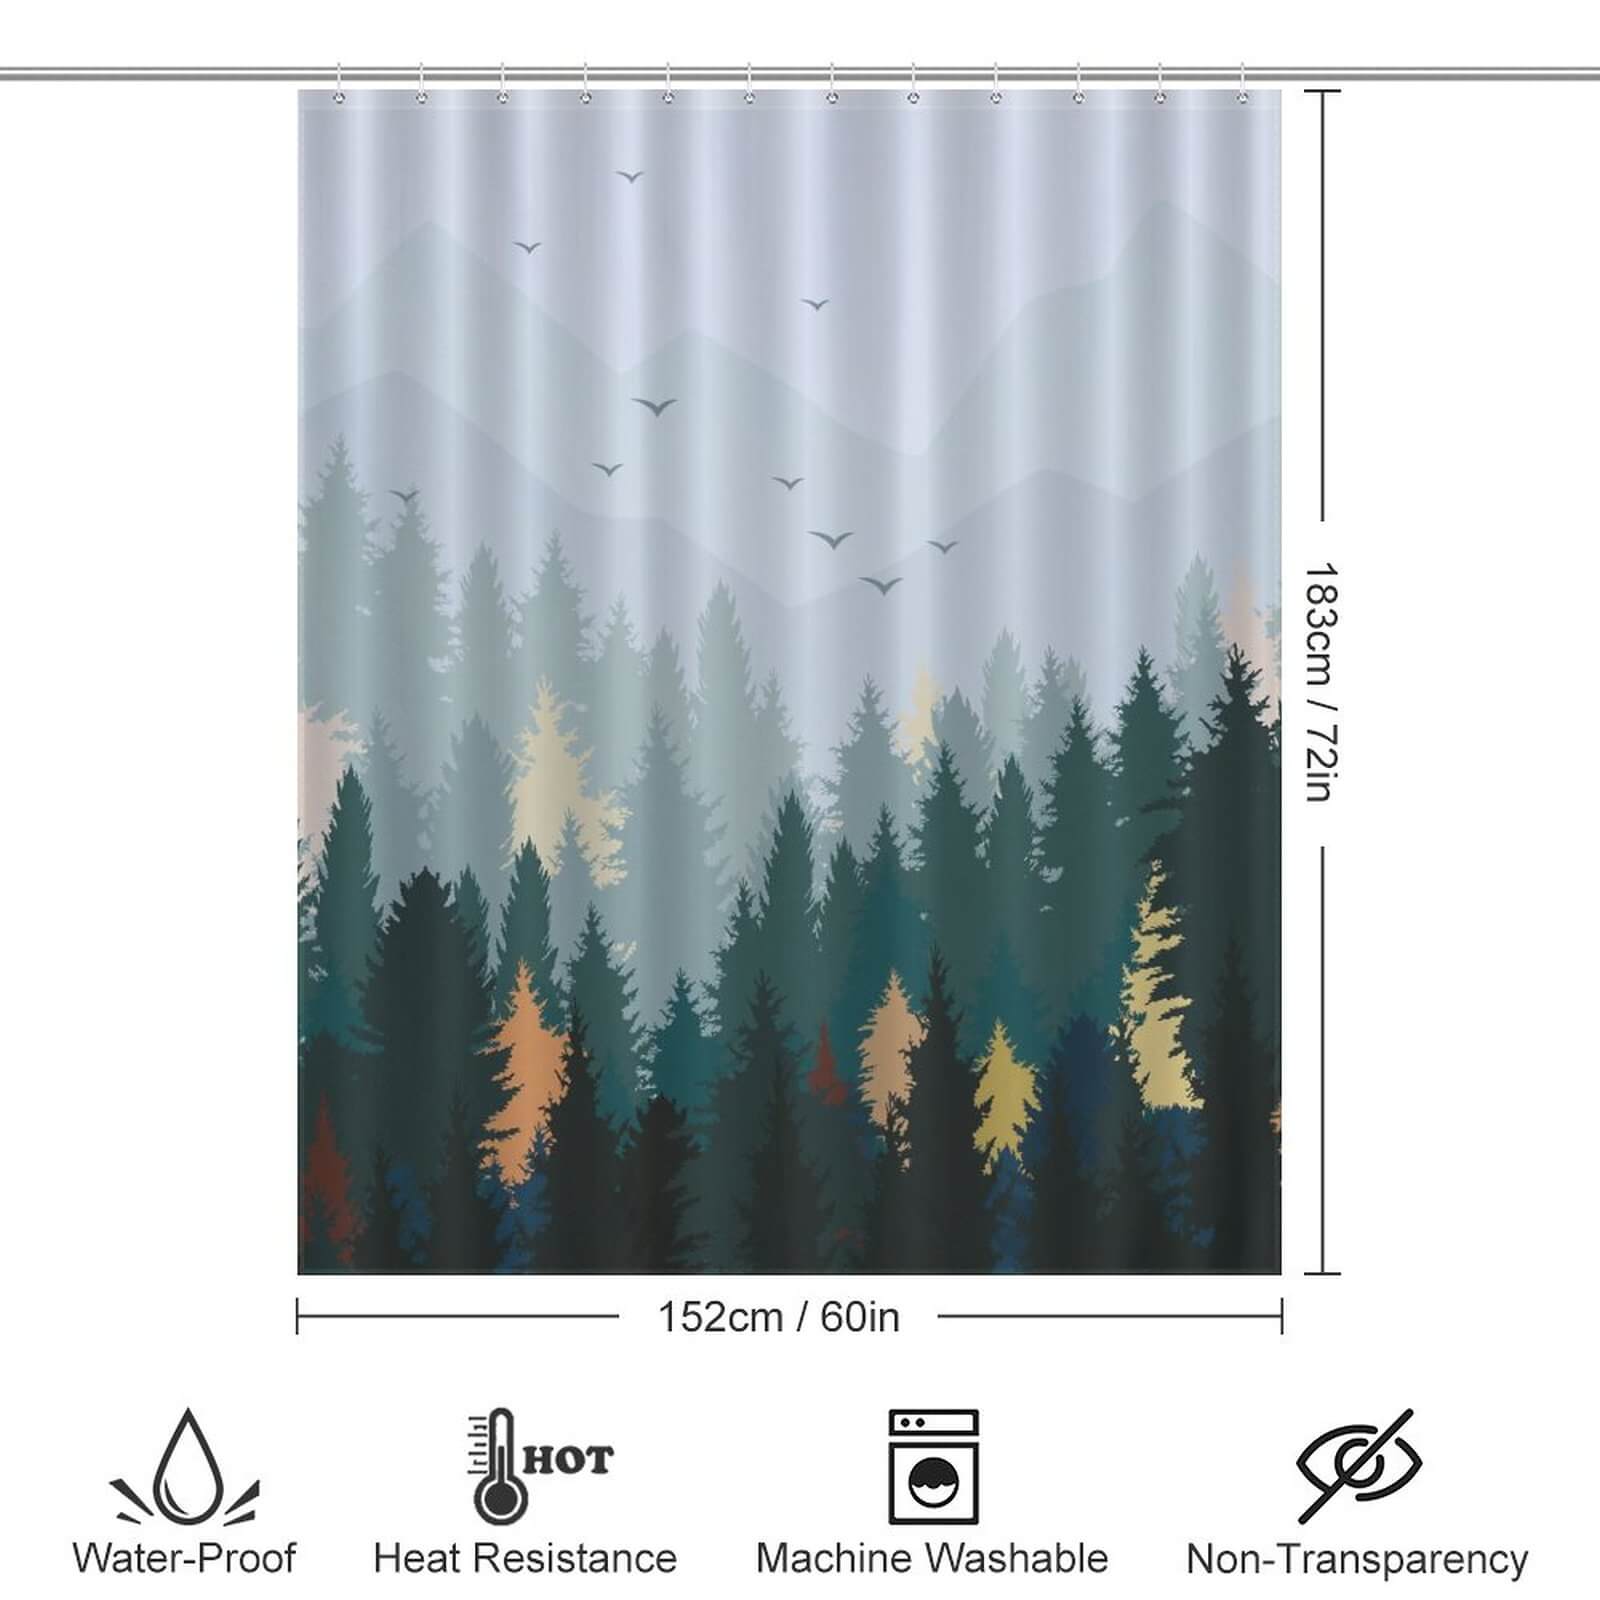 This Pine Forest Shower Curtain from Cotton Cat features a serene forest scene with trees and birds, making it the perfect addition to your bathroom decor.